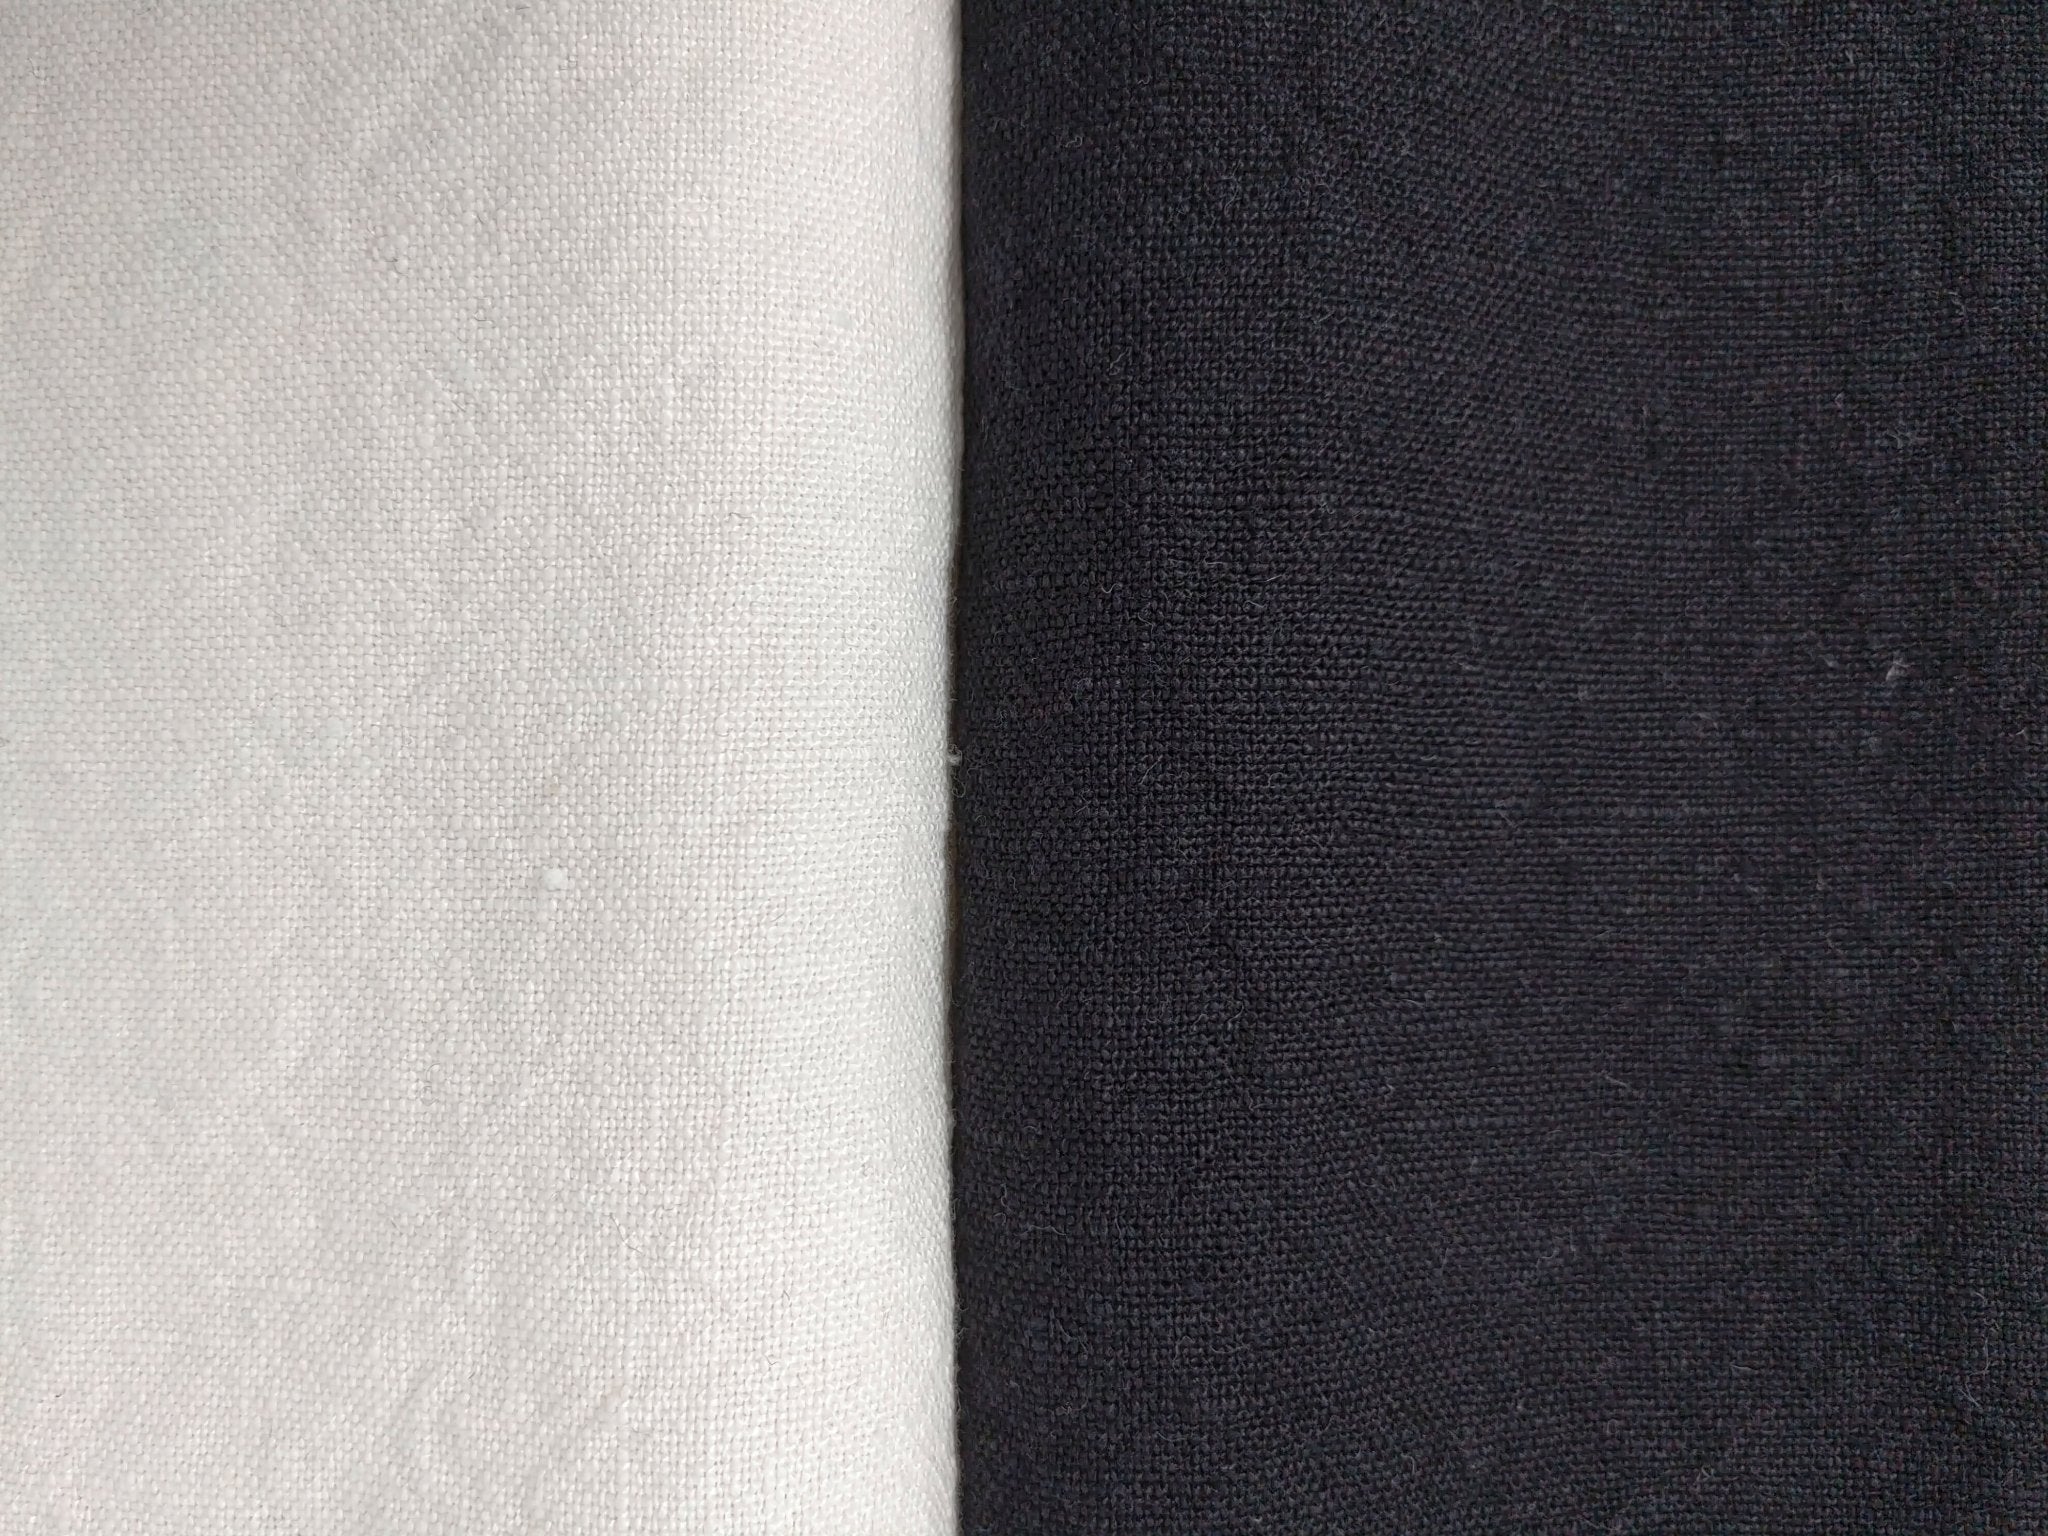 Heavy Weight 100% Linen Fabric - High Twisted 6s, White and Black Colors for Timeless Projects 4663 4966 - The Linen Lab - White